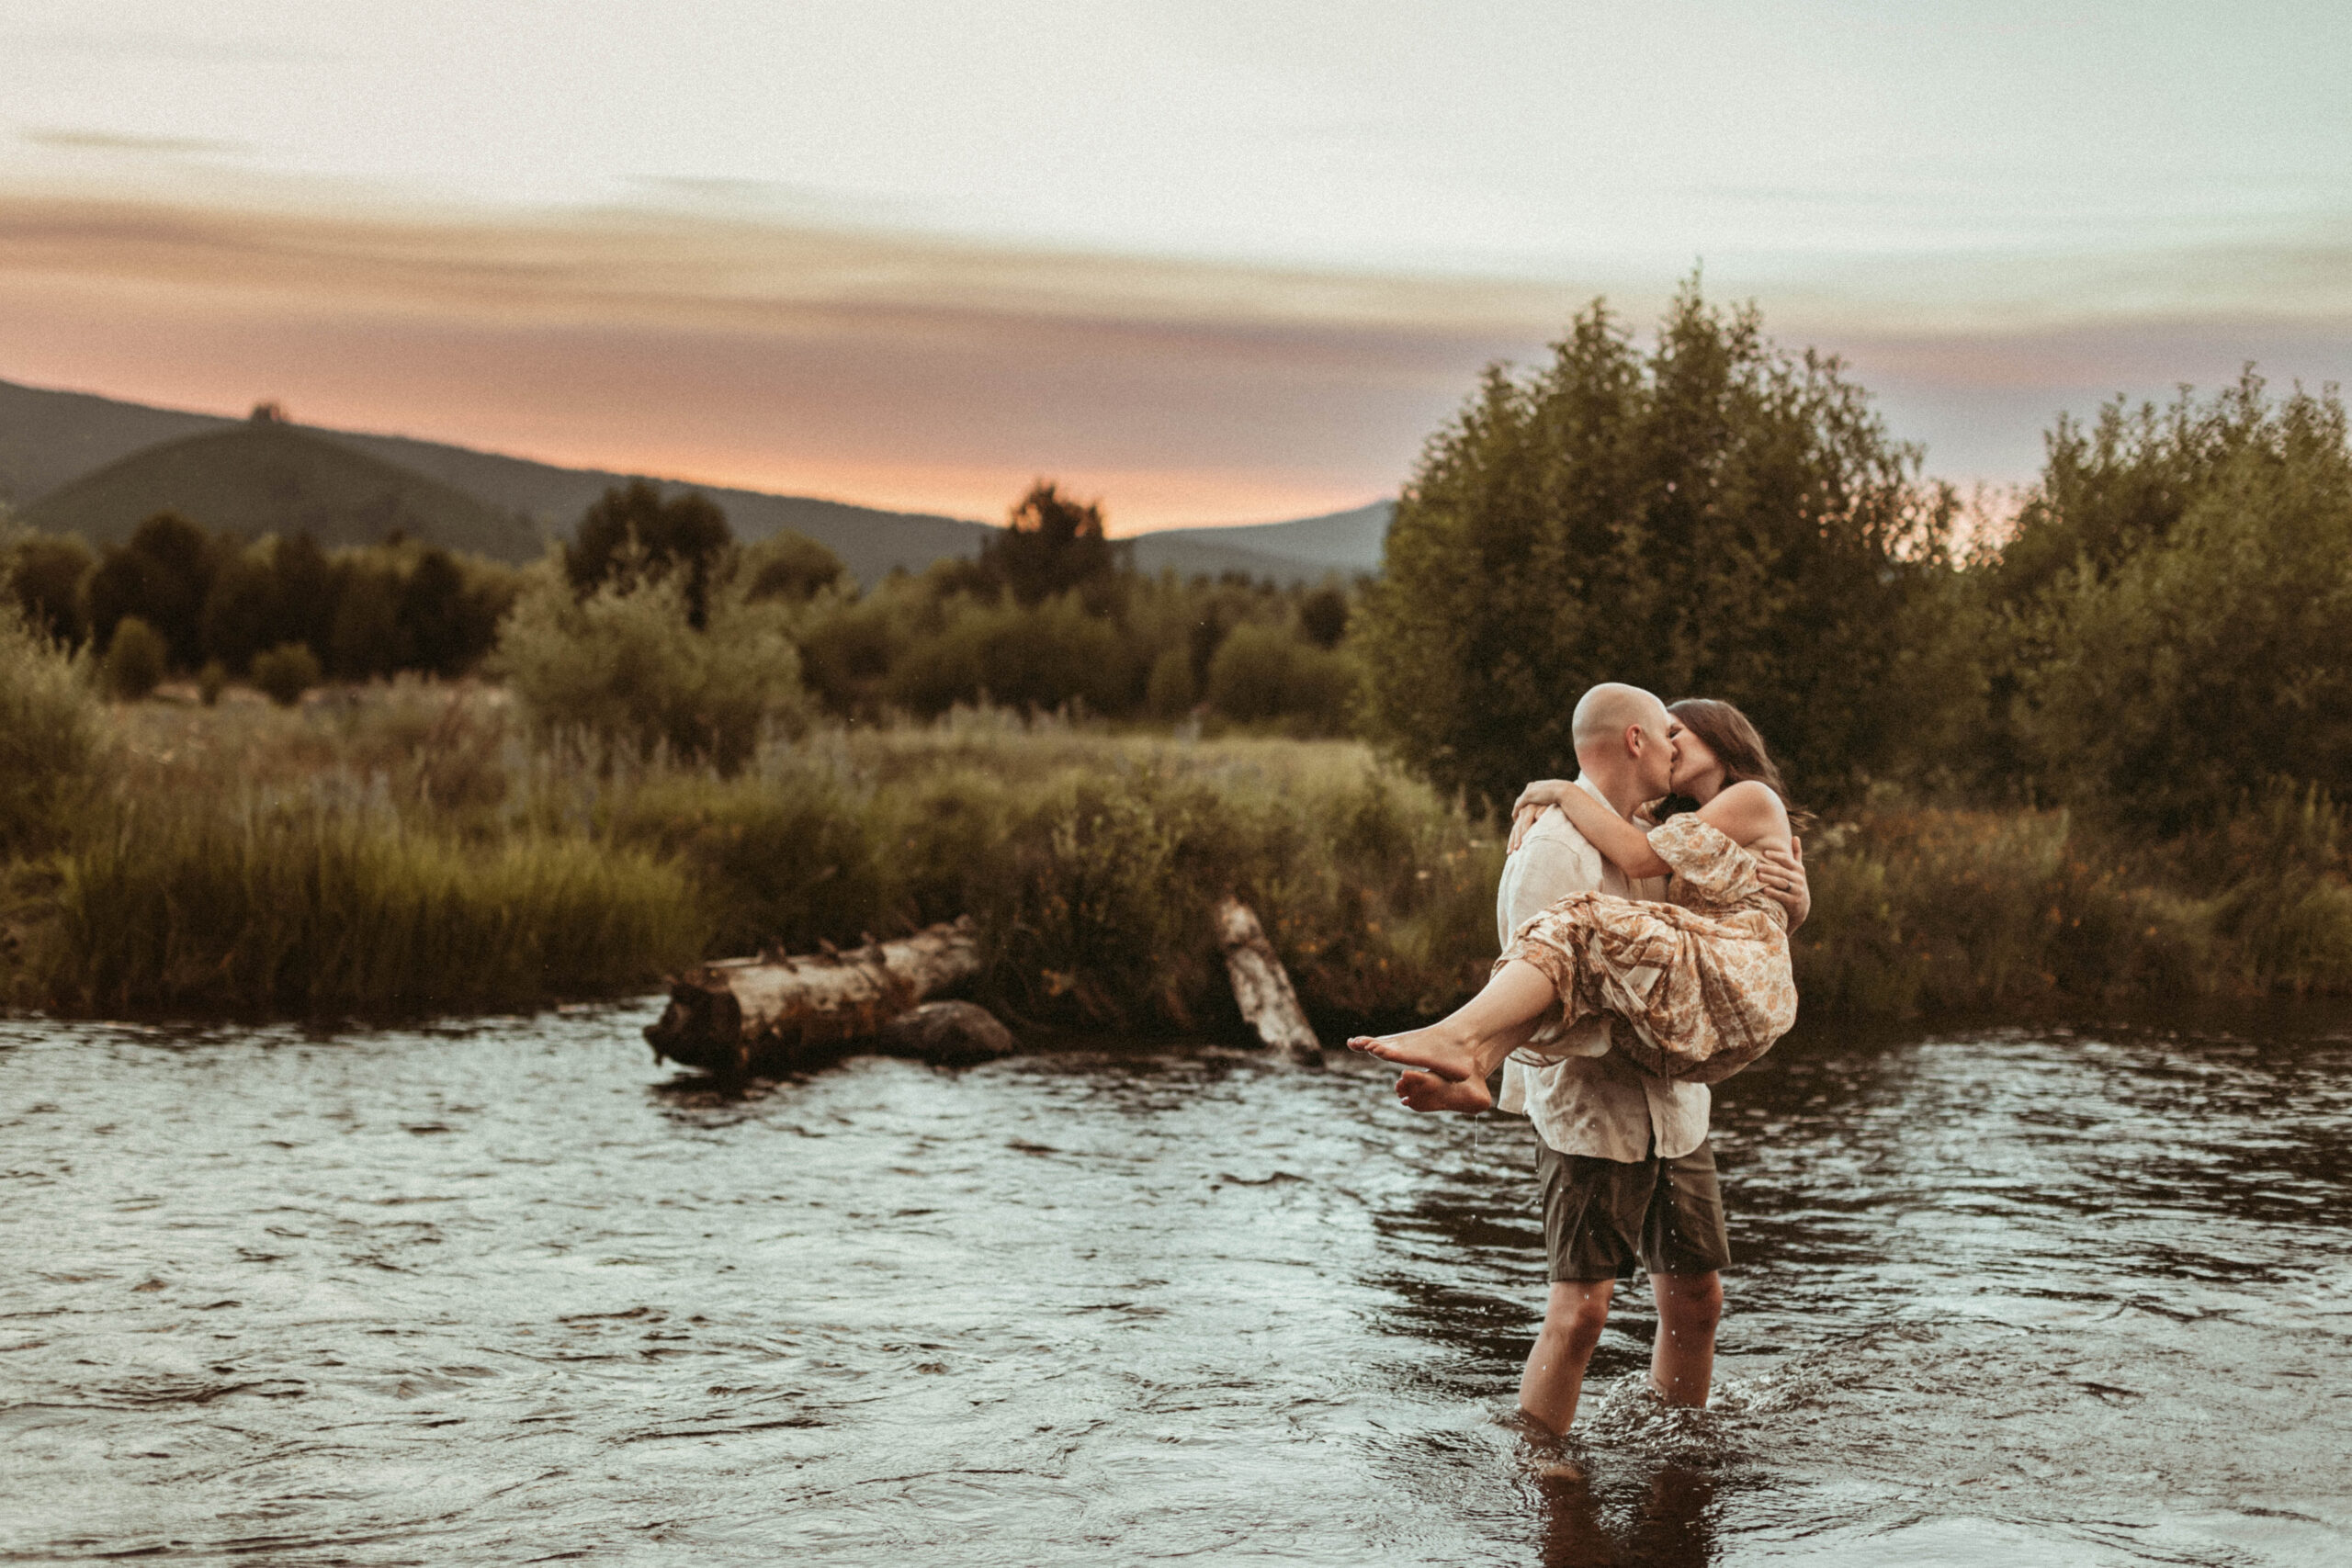 Man holding woman in arms in water while the sun sets